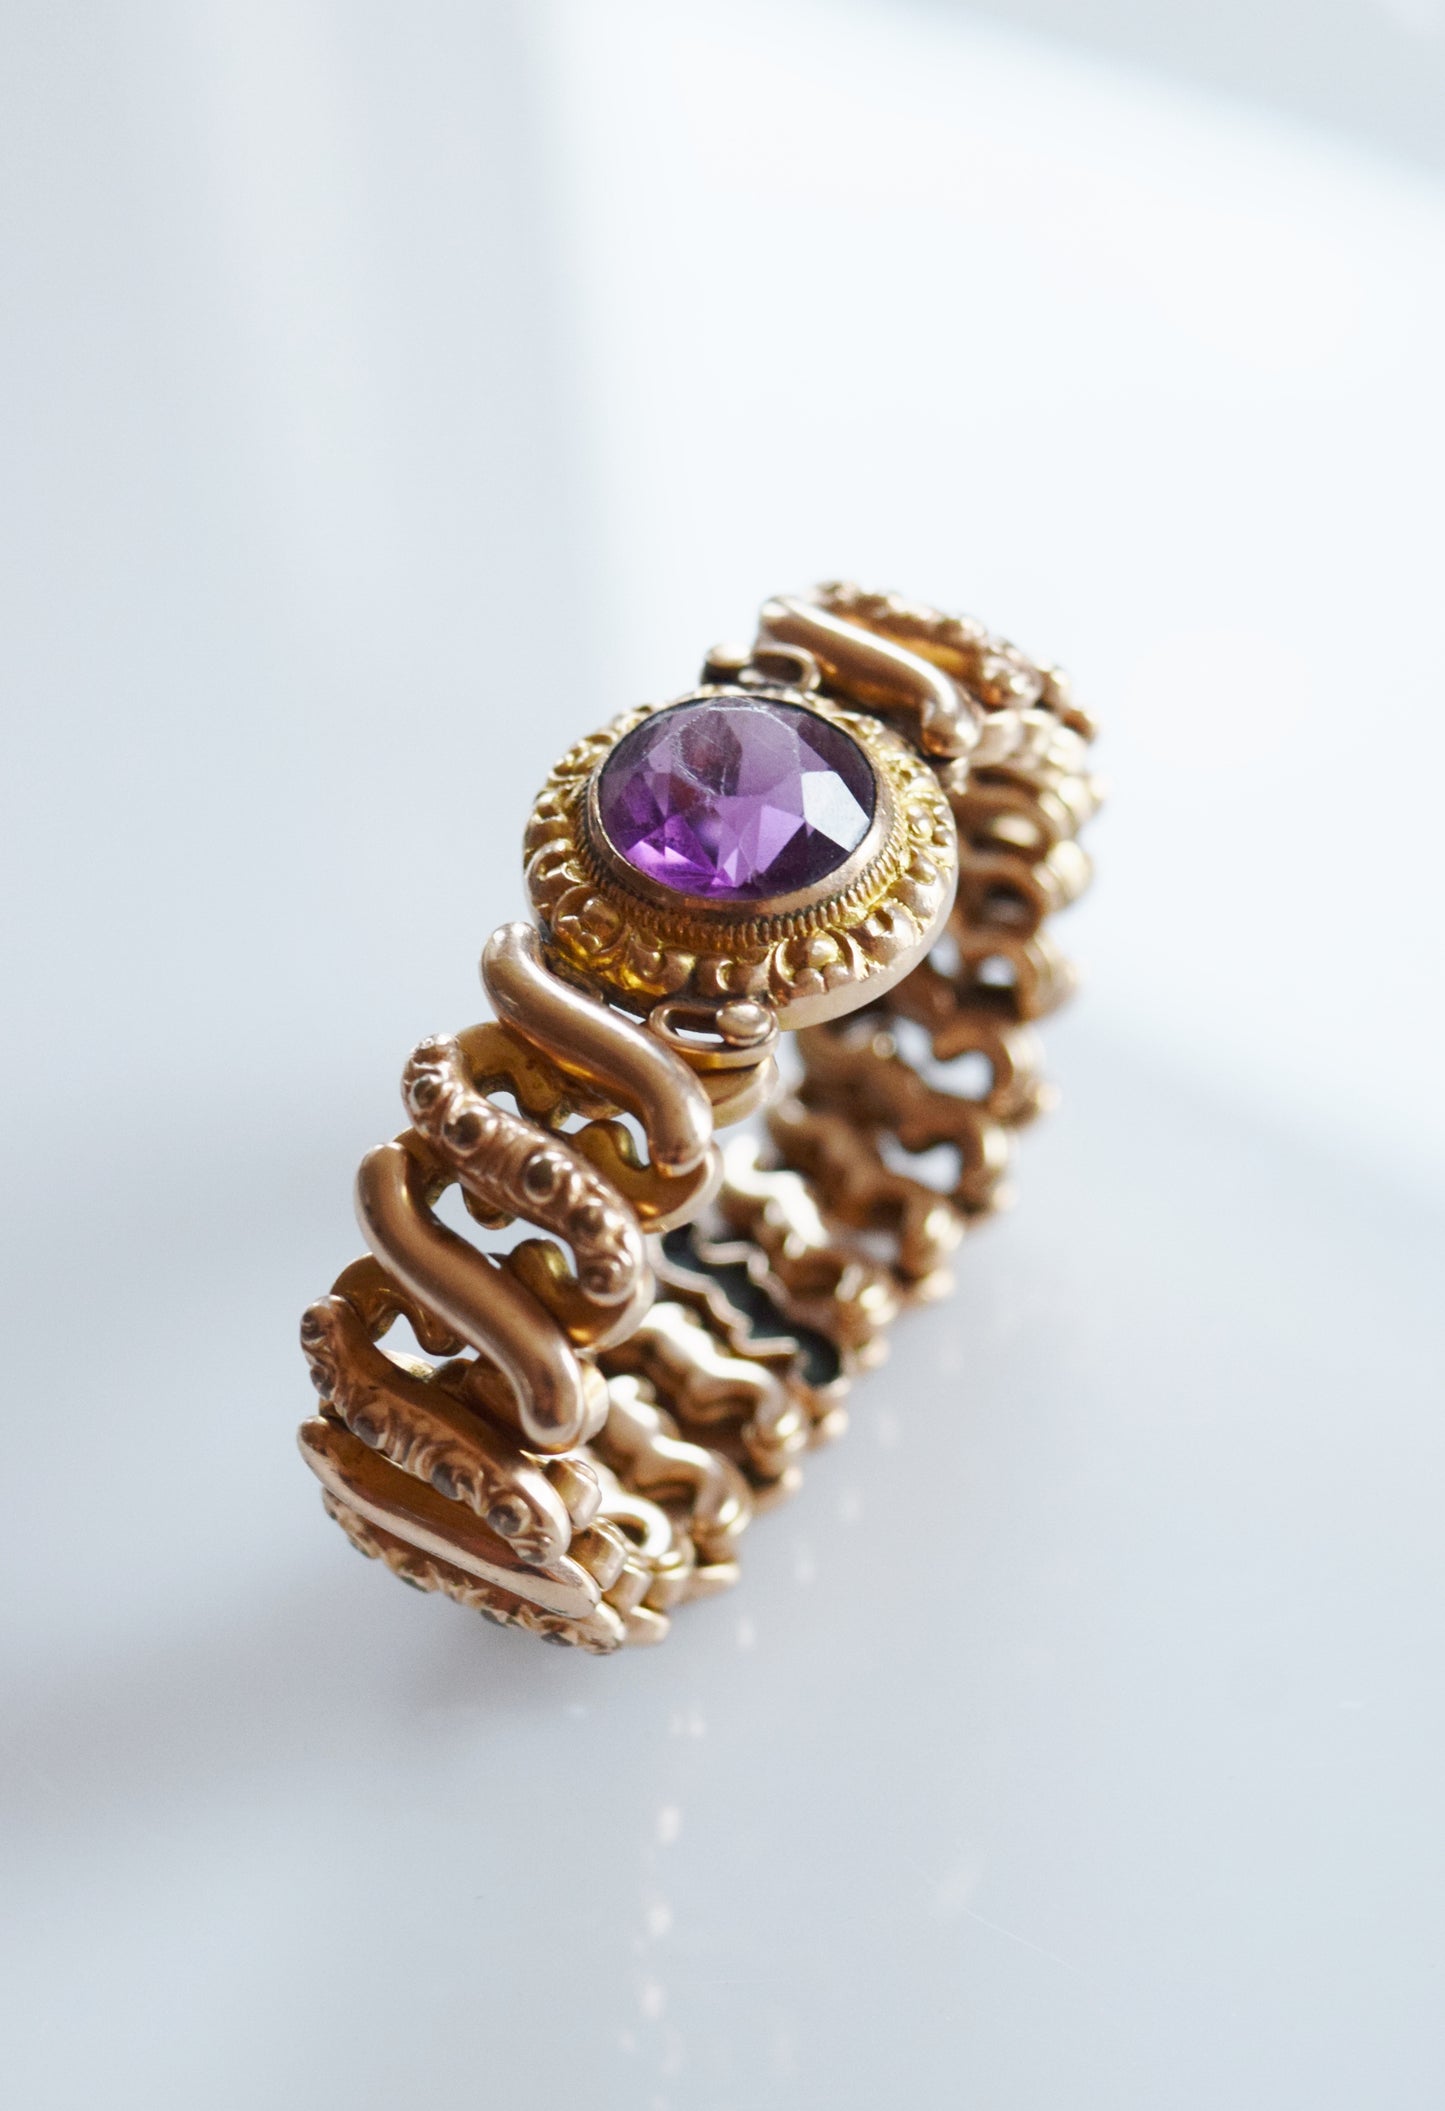 Victorian Revival Sweetheart Expansion Bracelet with Amethyst Stone | 1940s